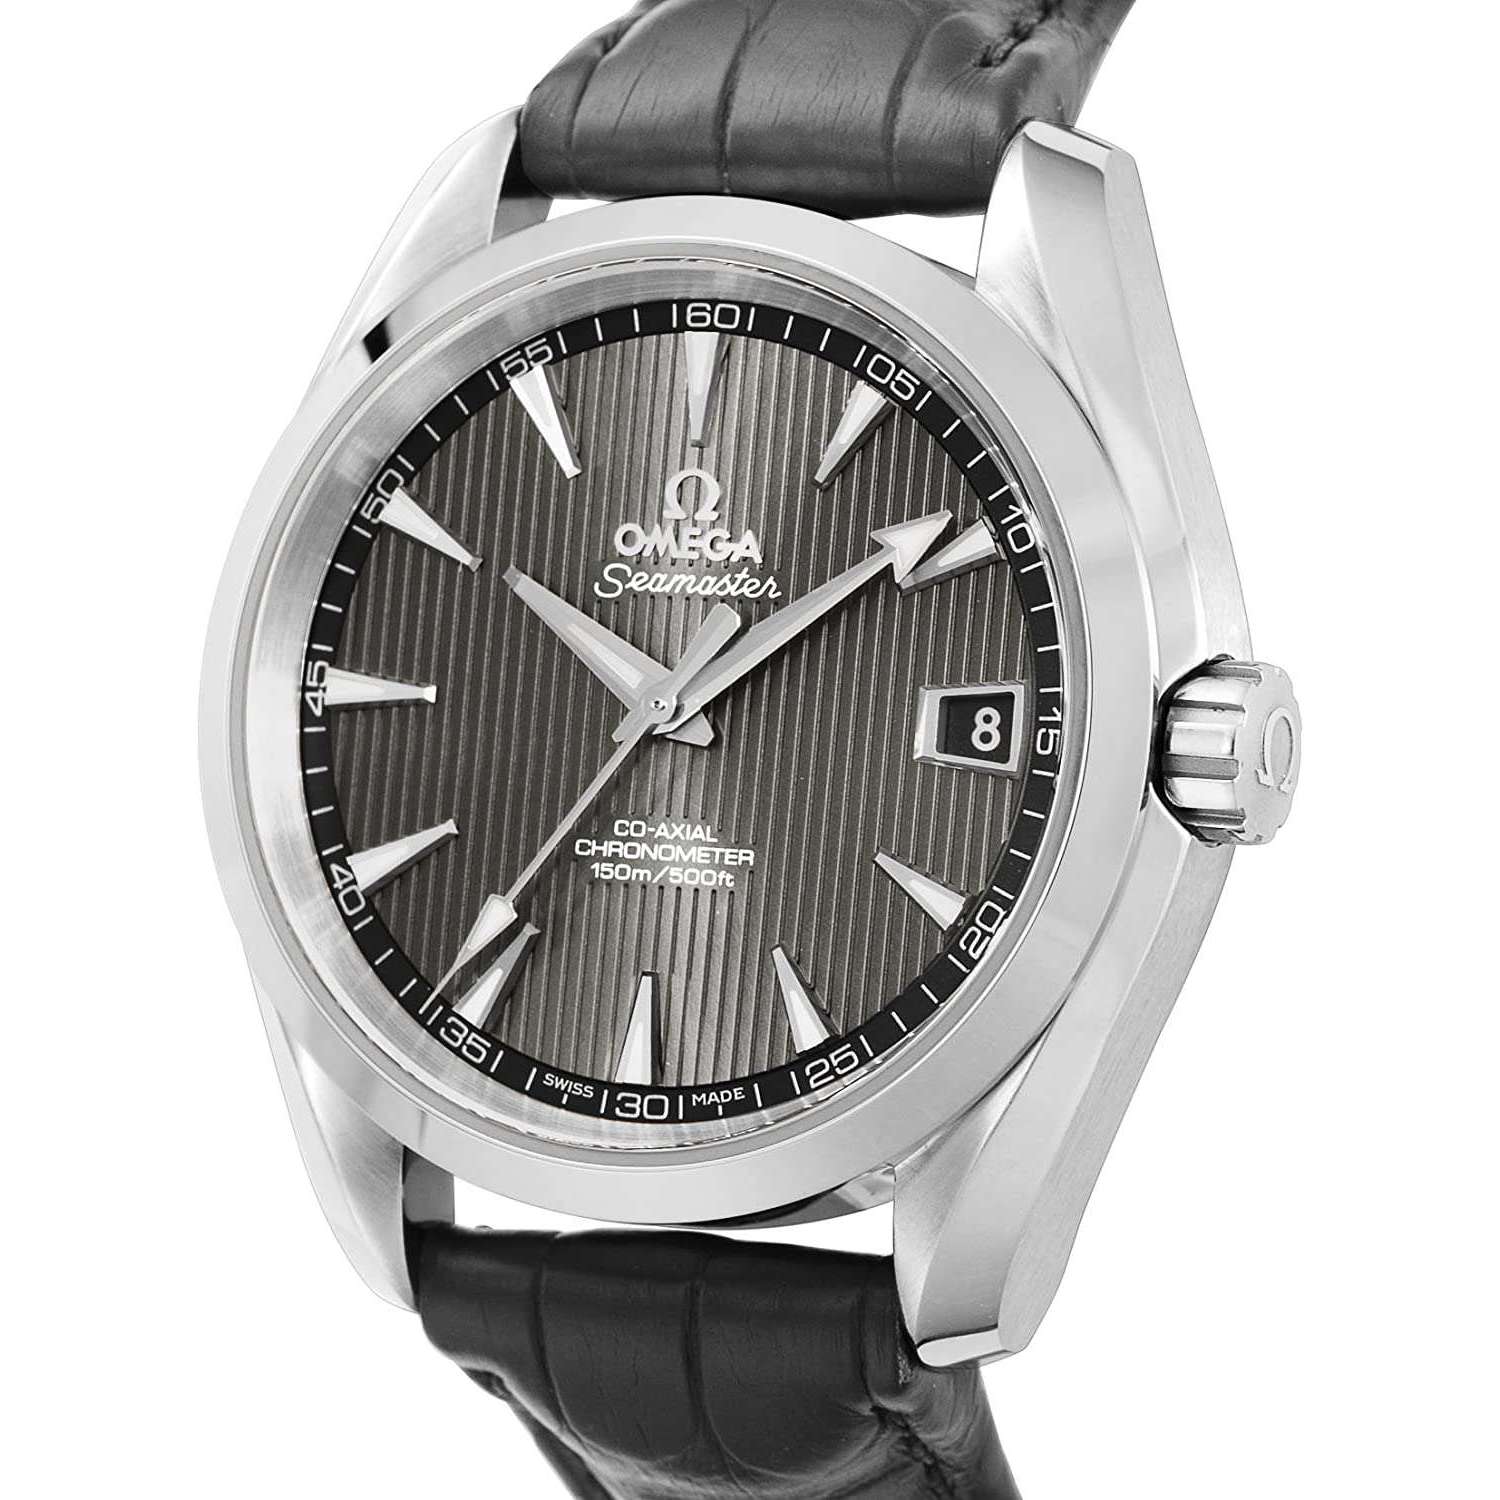 ROOK JAPAN:OMEGA SEAMASTER CO-AXIAL CHRONOMETER 38.5 MM MEN WATCH 231.13.39.21.06.001,Luxury Watch,Omega